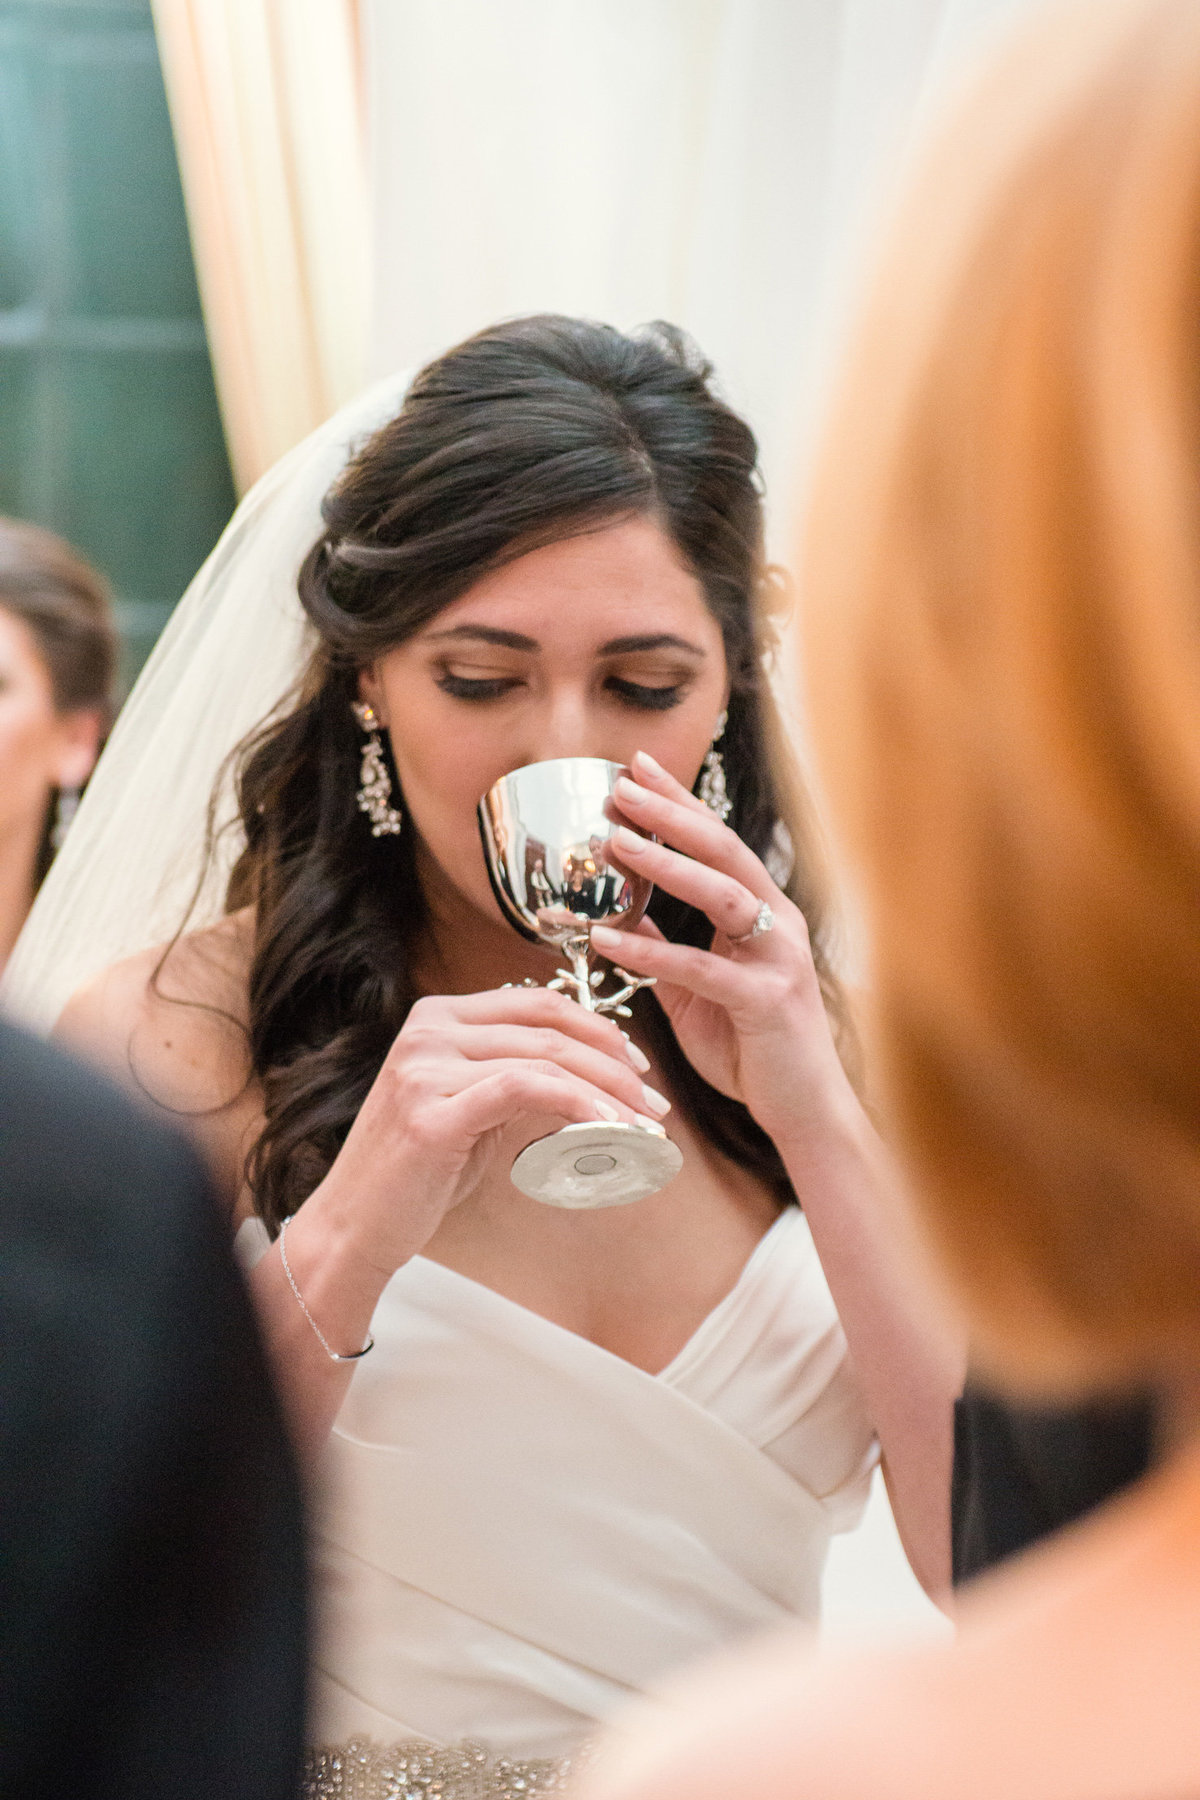 Bride drinking from her wine glass during a wedding ceremony at The Bourne Mansion